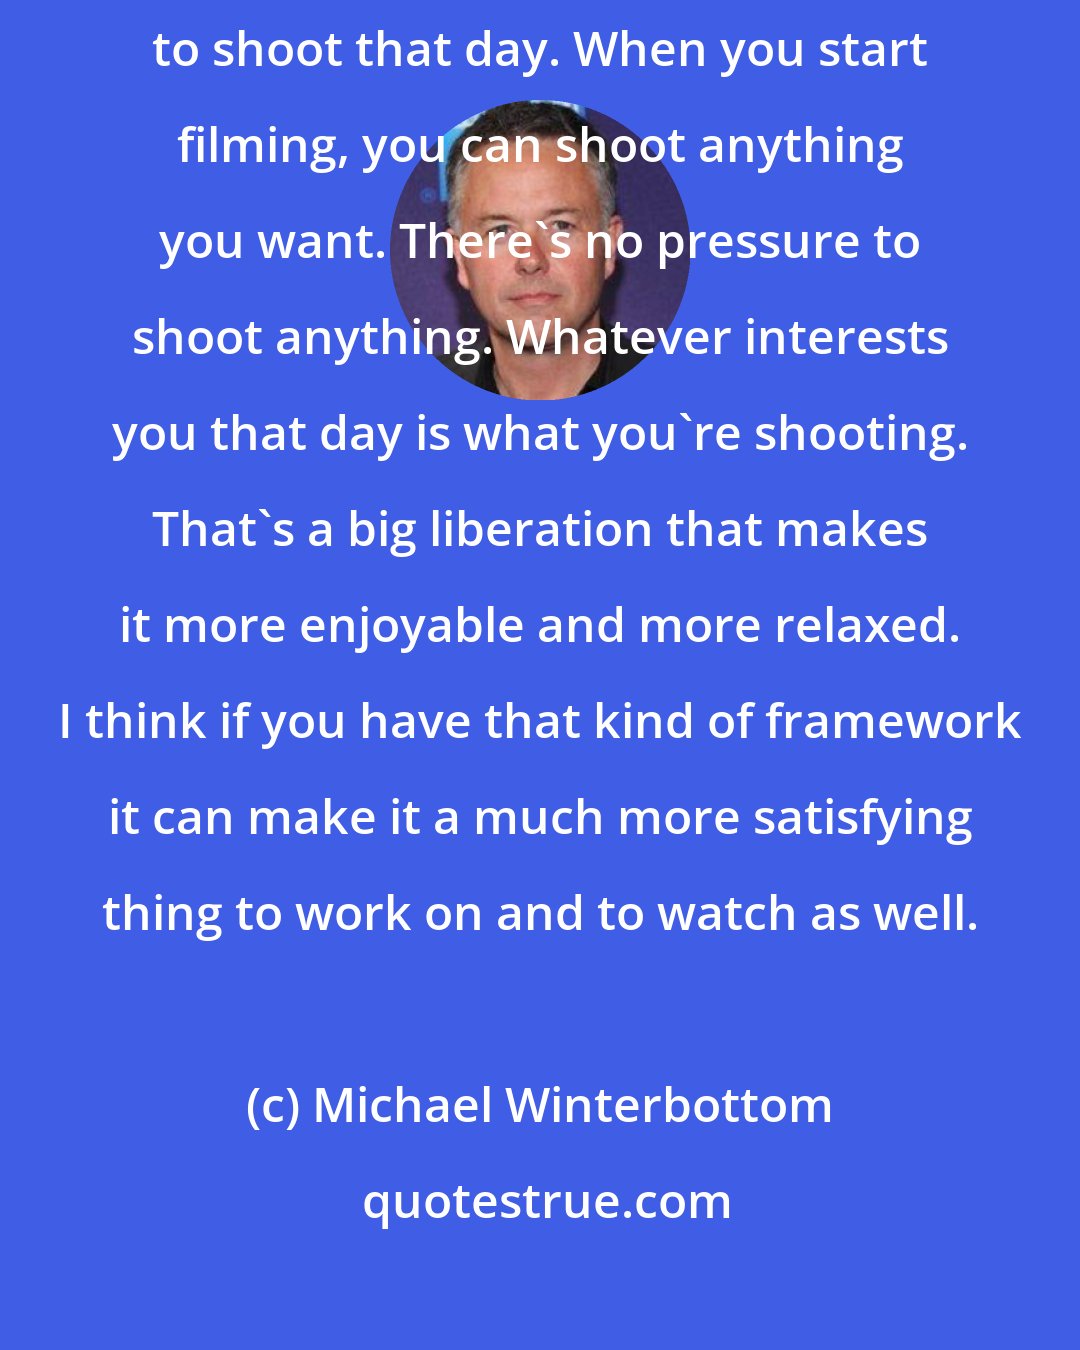 Michael Winterbottom: The great thing about not having a script is there's nothing you have to shoot that day. When you start filming, you can shoot anything you want. There's no pressure to shoot anything. Whatever interests you that day is what you're shooting. That's a big liberation that makes it more enjoyable and more relaxed. I think if you have that kind of framework it can make it a much more satisfying thing to work on and to watch as well.